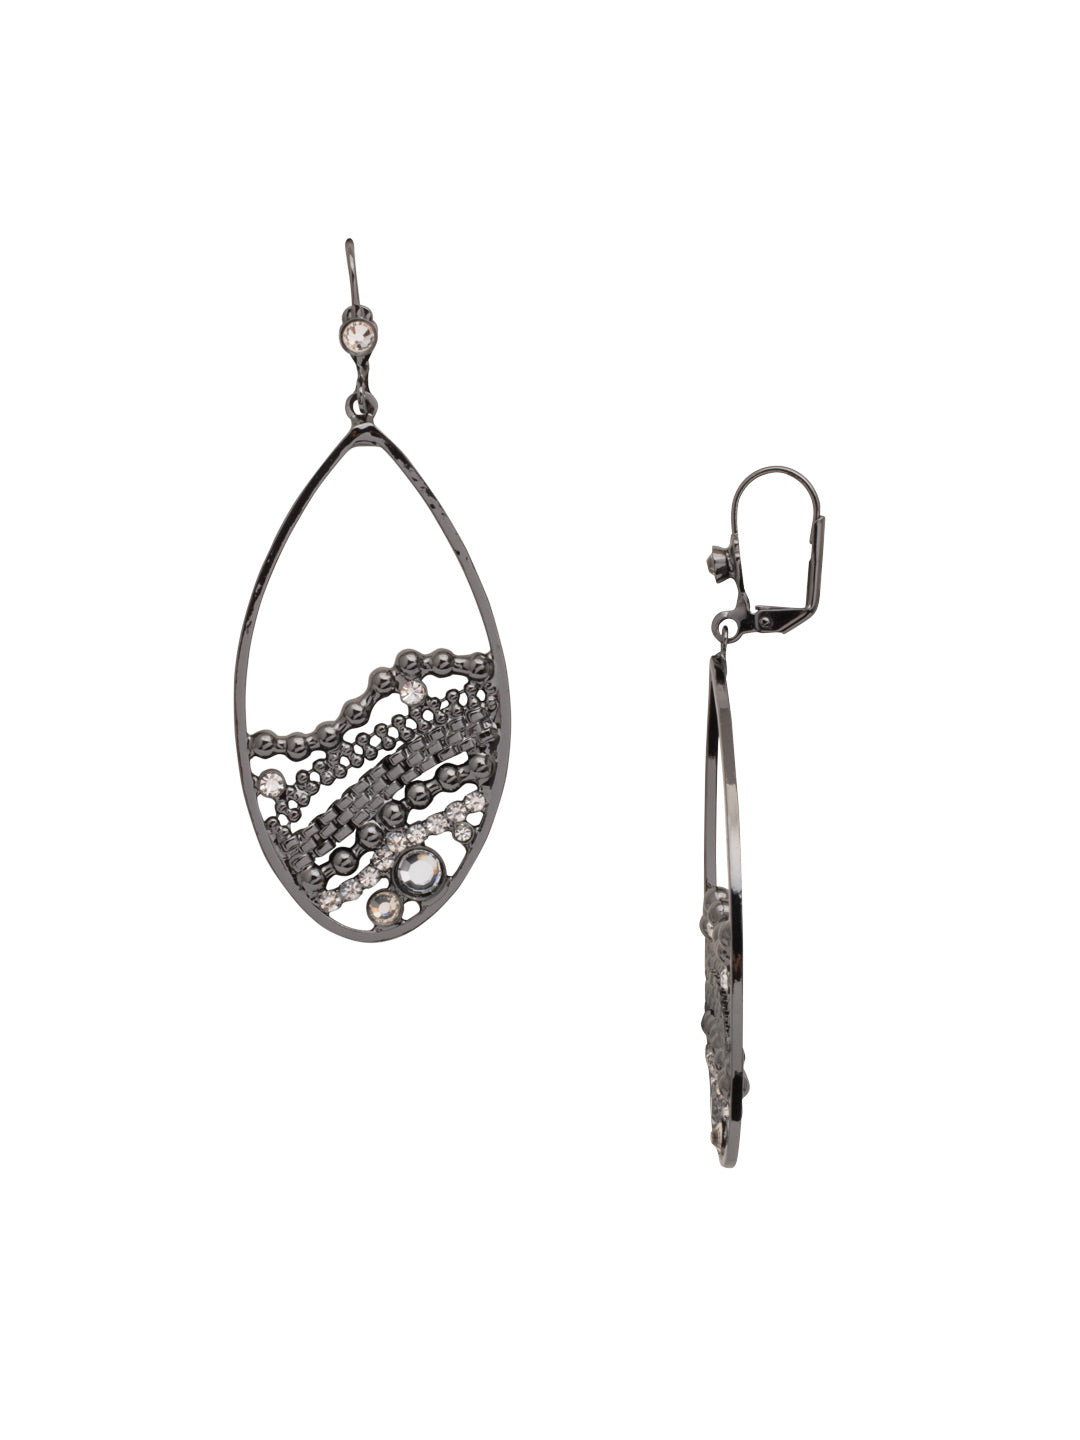 Khaleesi Statement Earring - 4EFC16GMCRY - <p>The Khaleesi Statement Earrings feature scale-like detailed metal oblong hoops, dangling prominently from a lever back French wire studded with a single crystal. From Sorrelli's Crystal collection in our Gun Metal finish.</p>